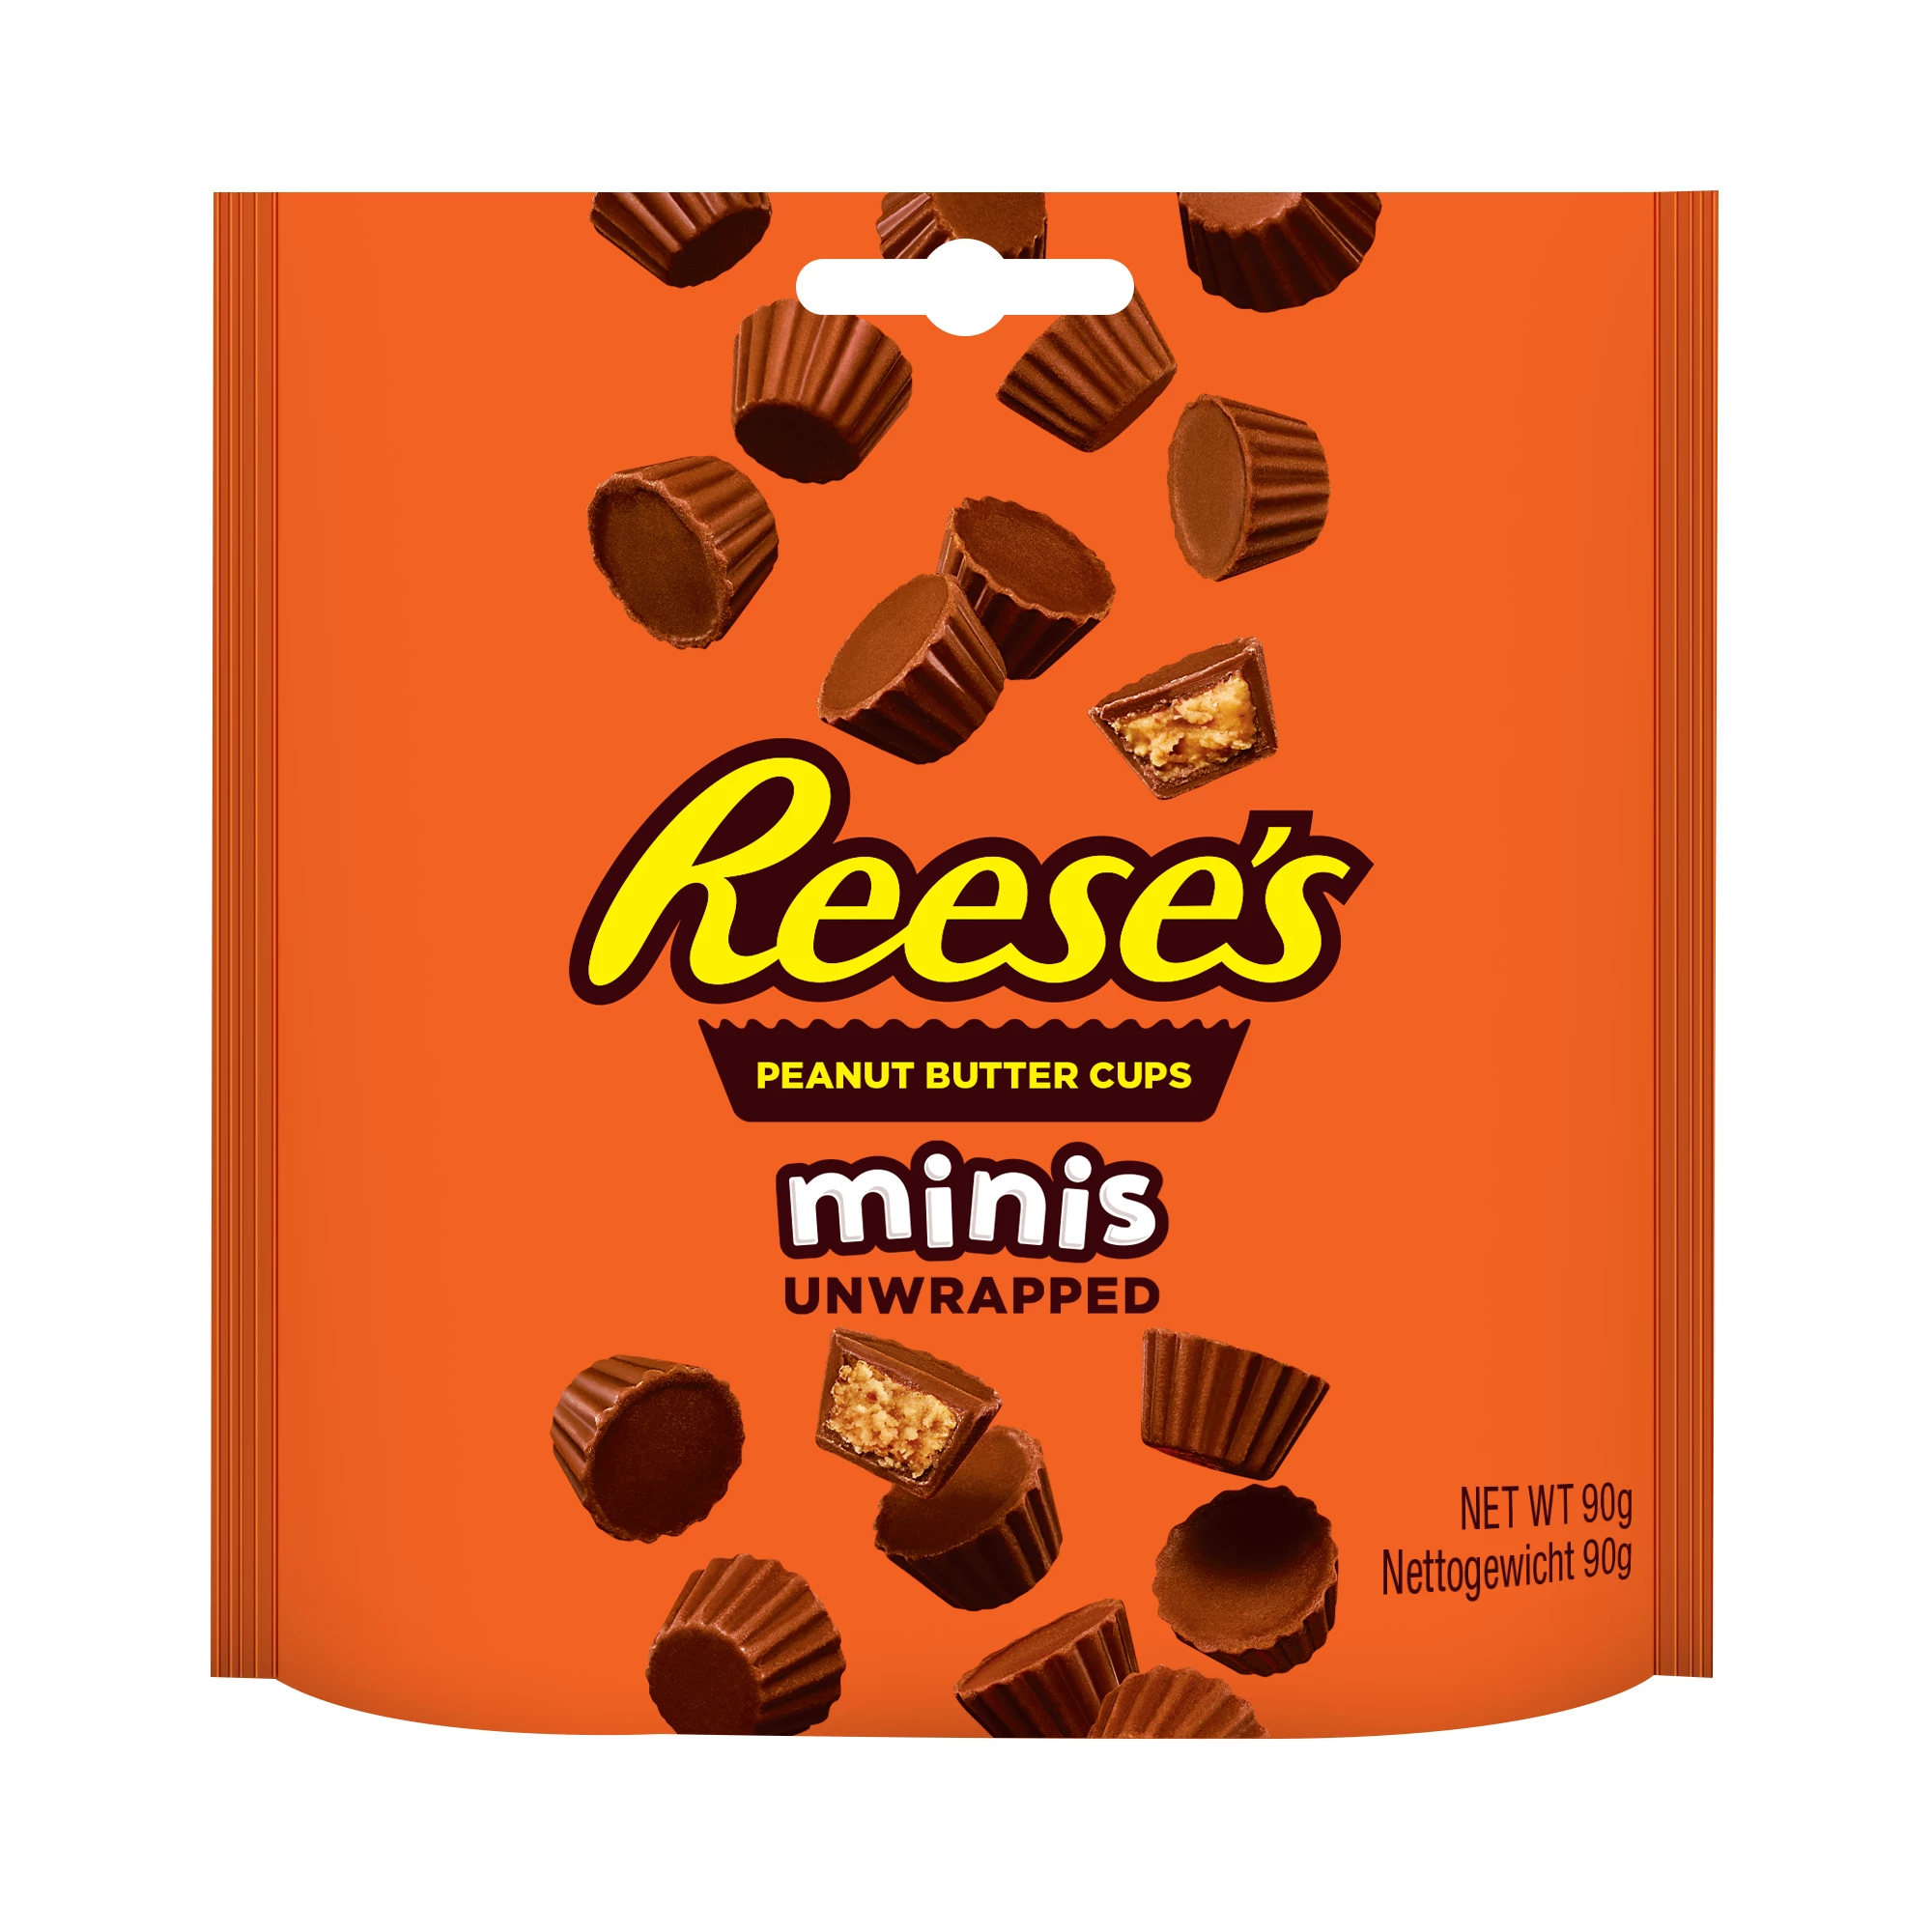 Packung Reese's Peanut Butter Mini Cups 90g